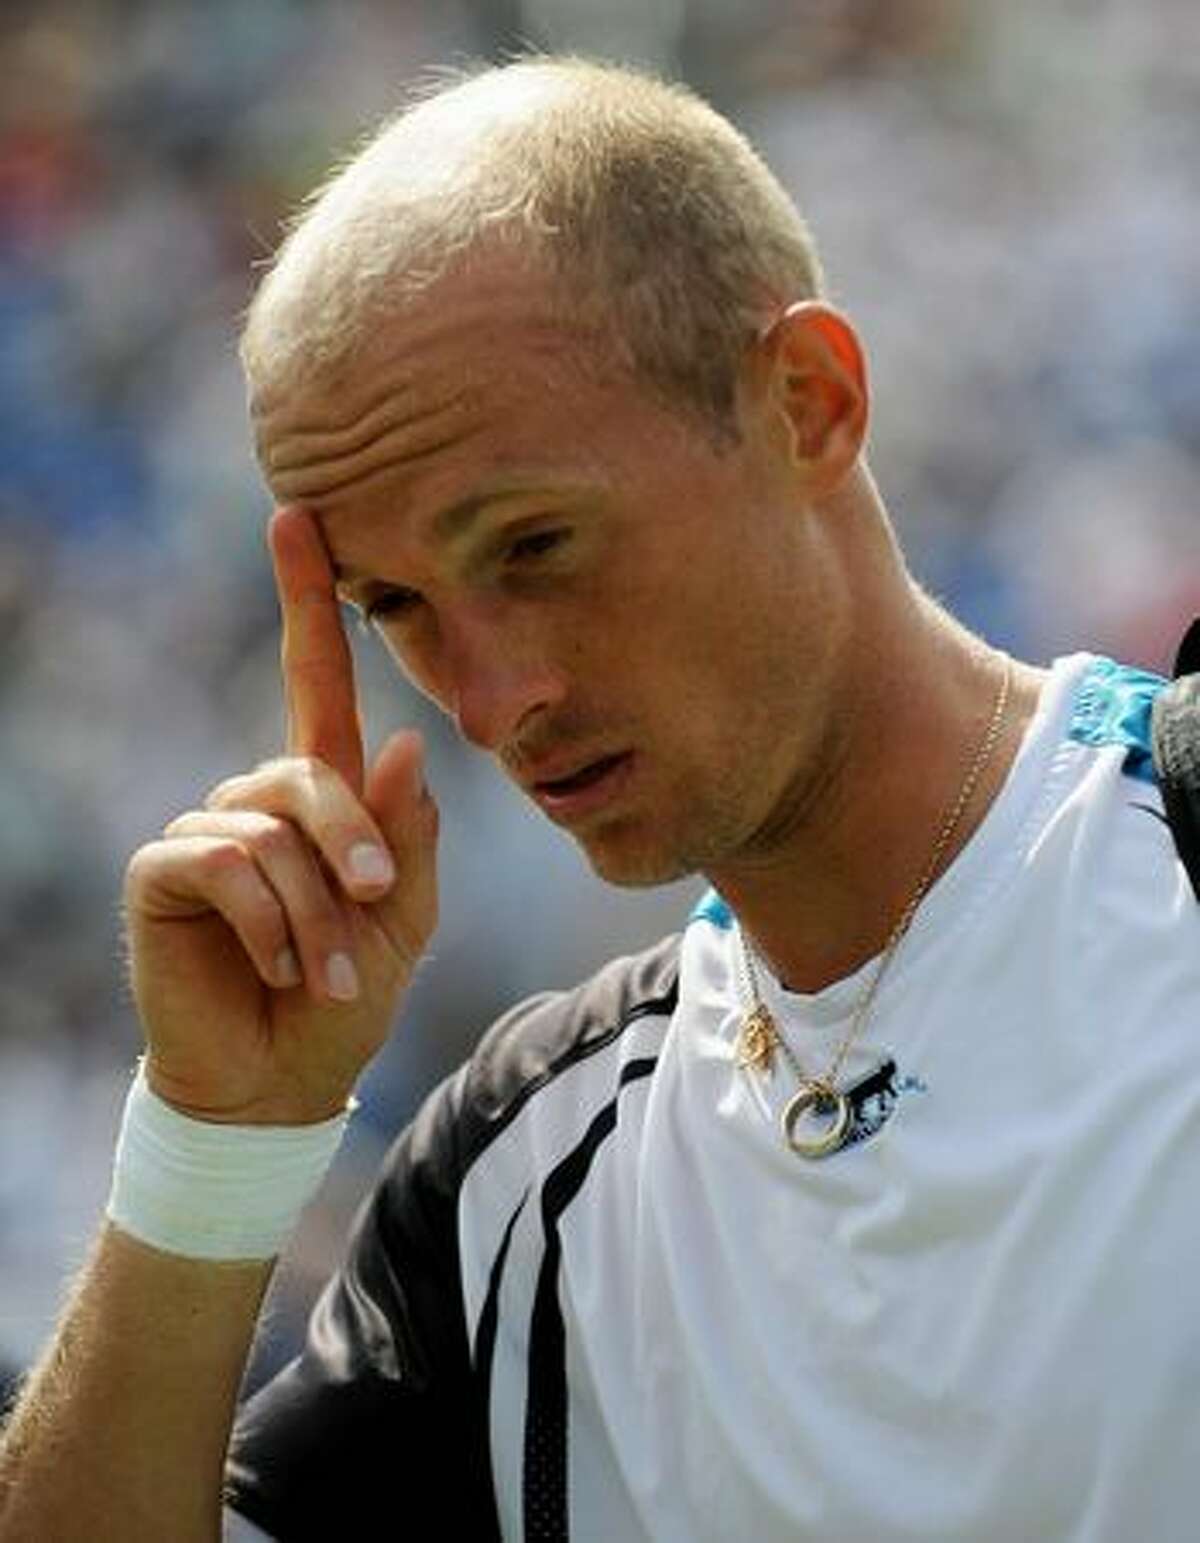 Nikolay Davydenko of Russia walks off the court after retiring due to injury against Robin Soderling of Sweden during their 4th round US Open match at the USTA Billie Jean King National Tennis Center in New York.